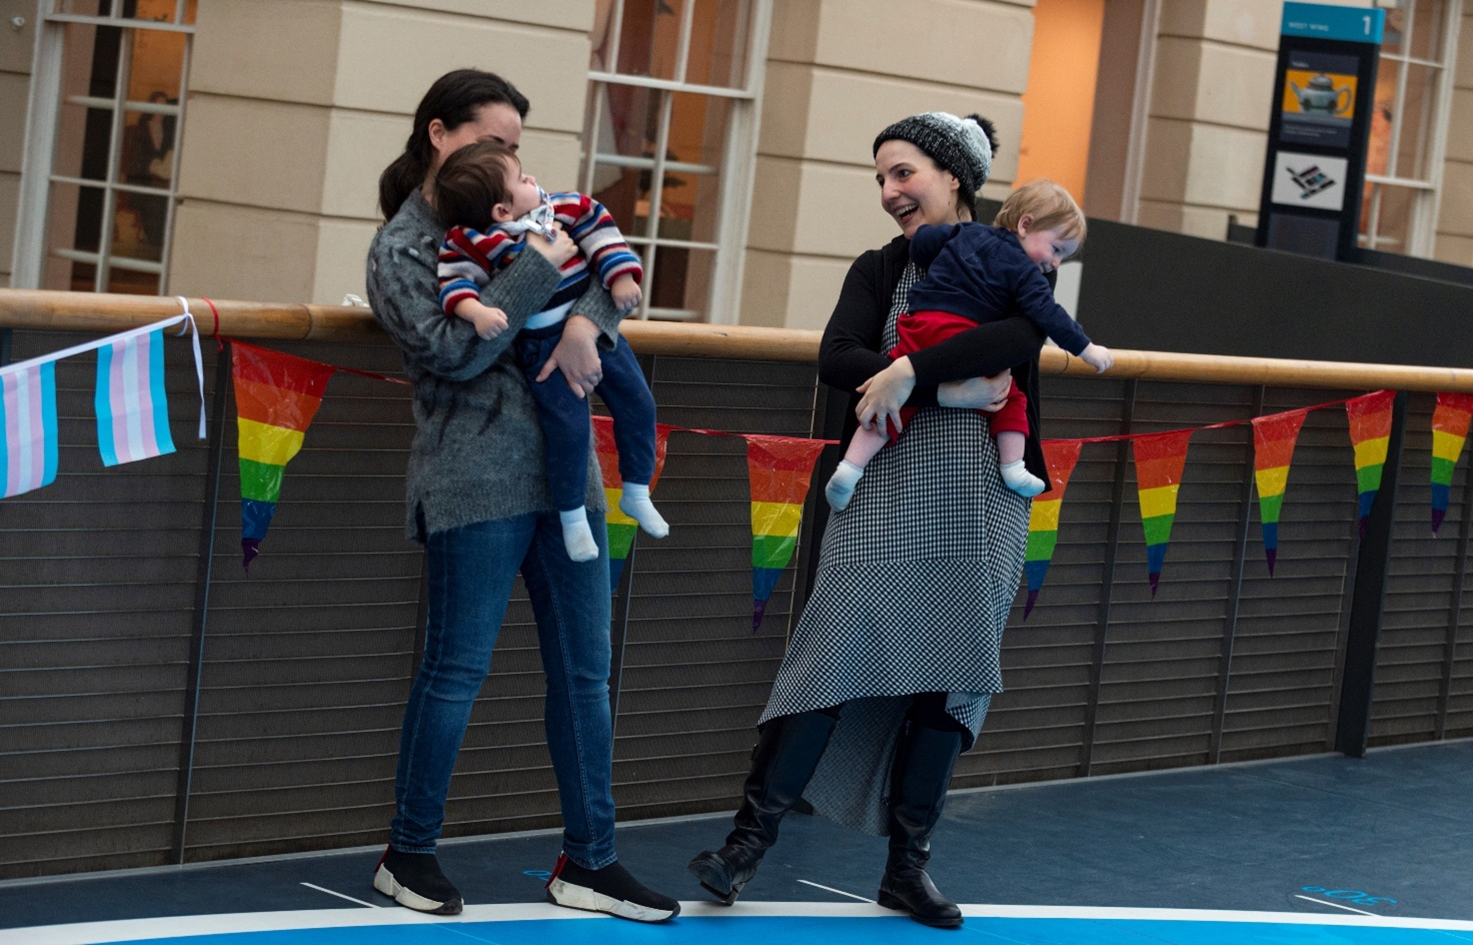 Two women holding toddlers in their arms in a museum gallery with rainbow flags hung up behind them.